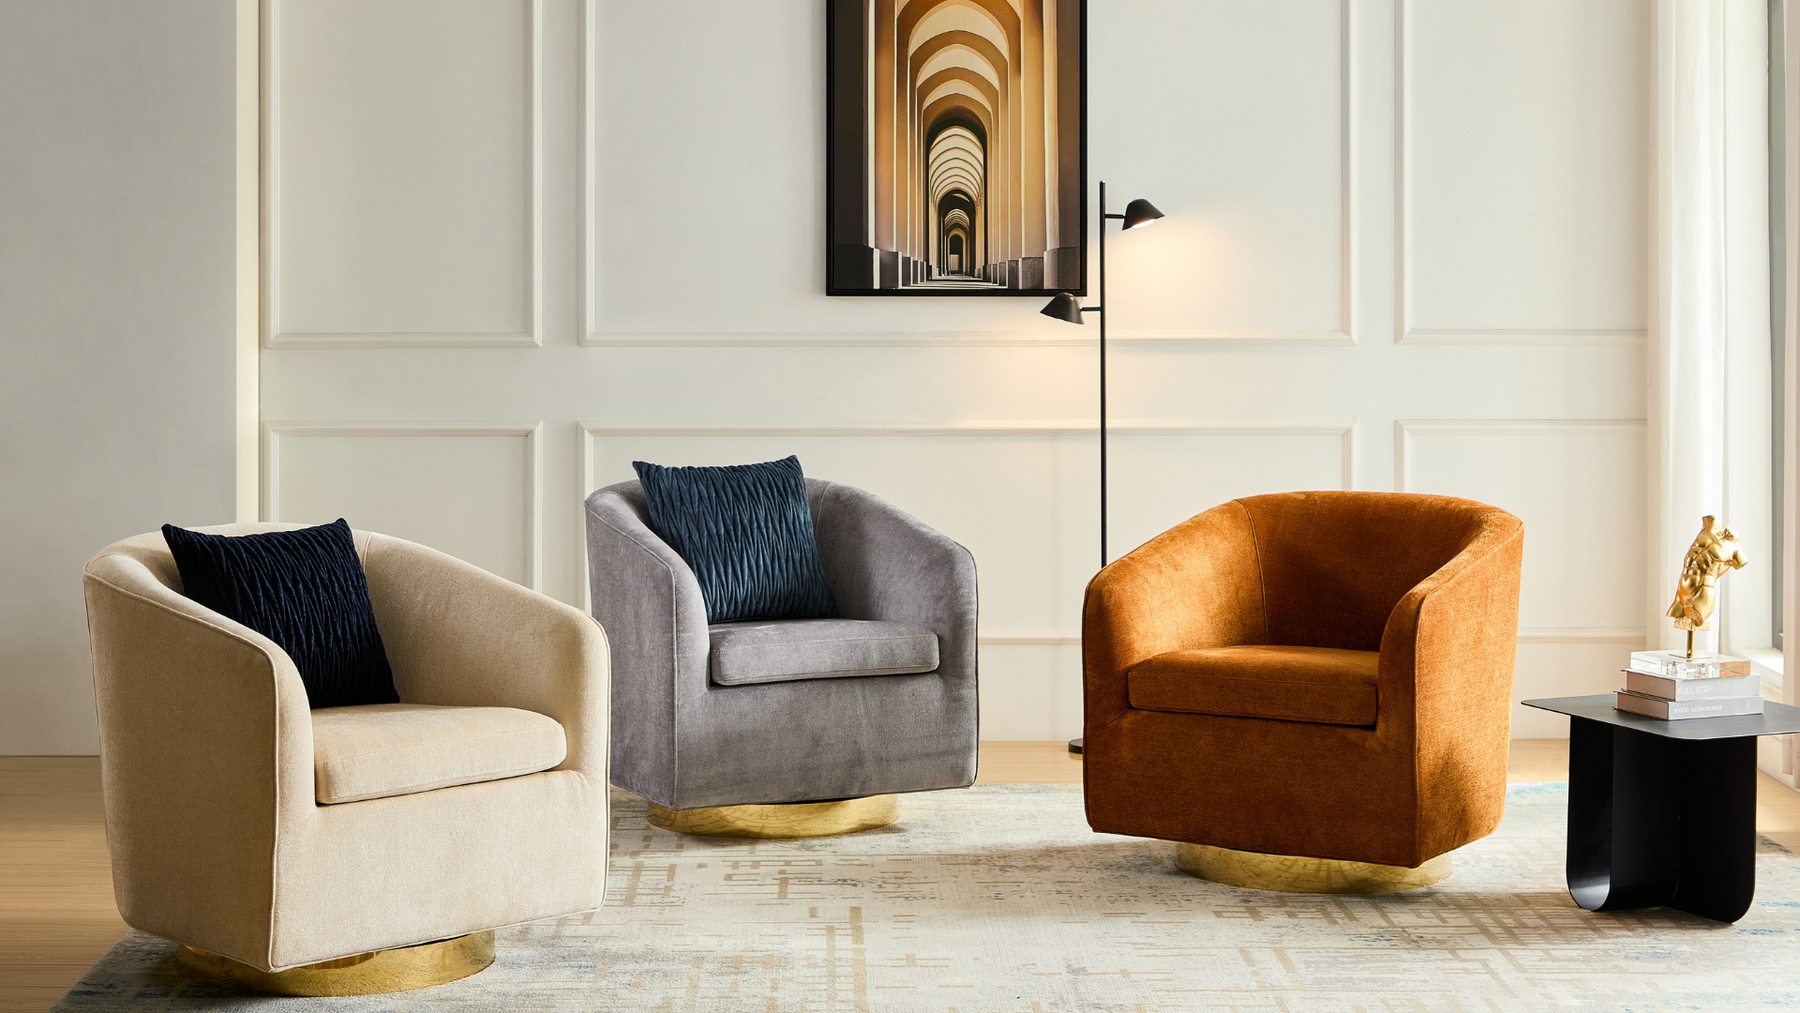 Charlotte Tub Swivel Armchair Grey, Ivory and Copper Front On View in a Room Setting